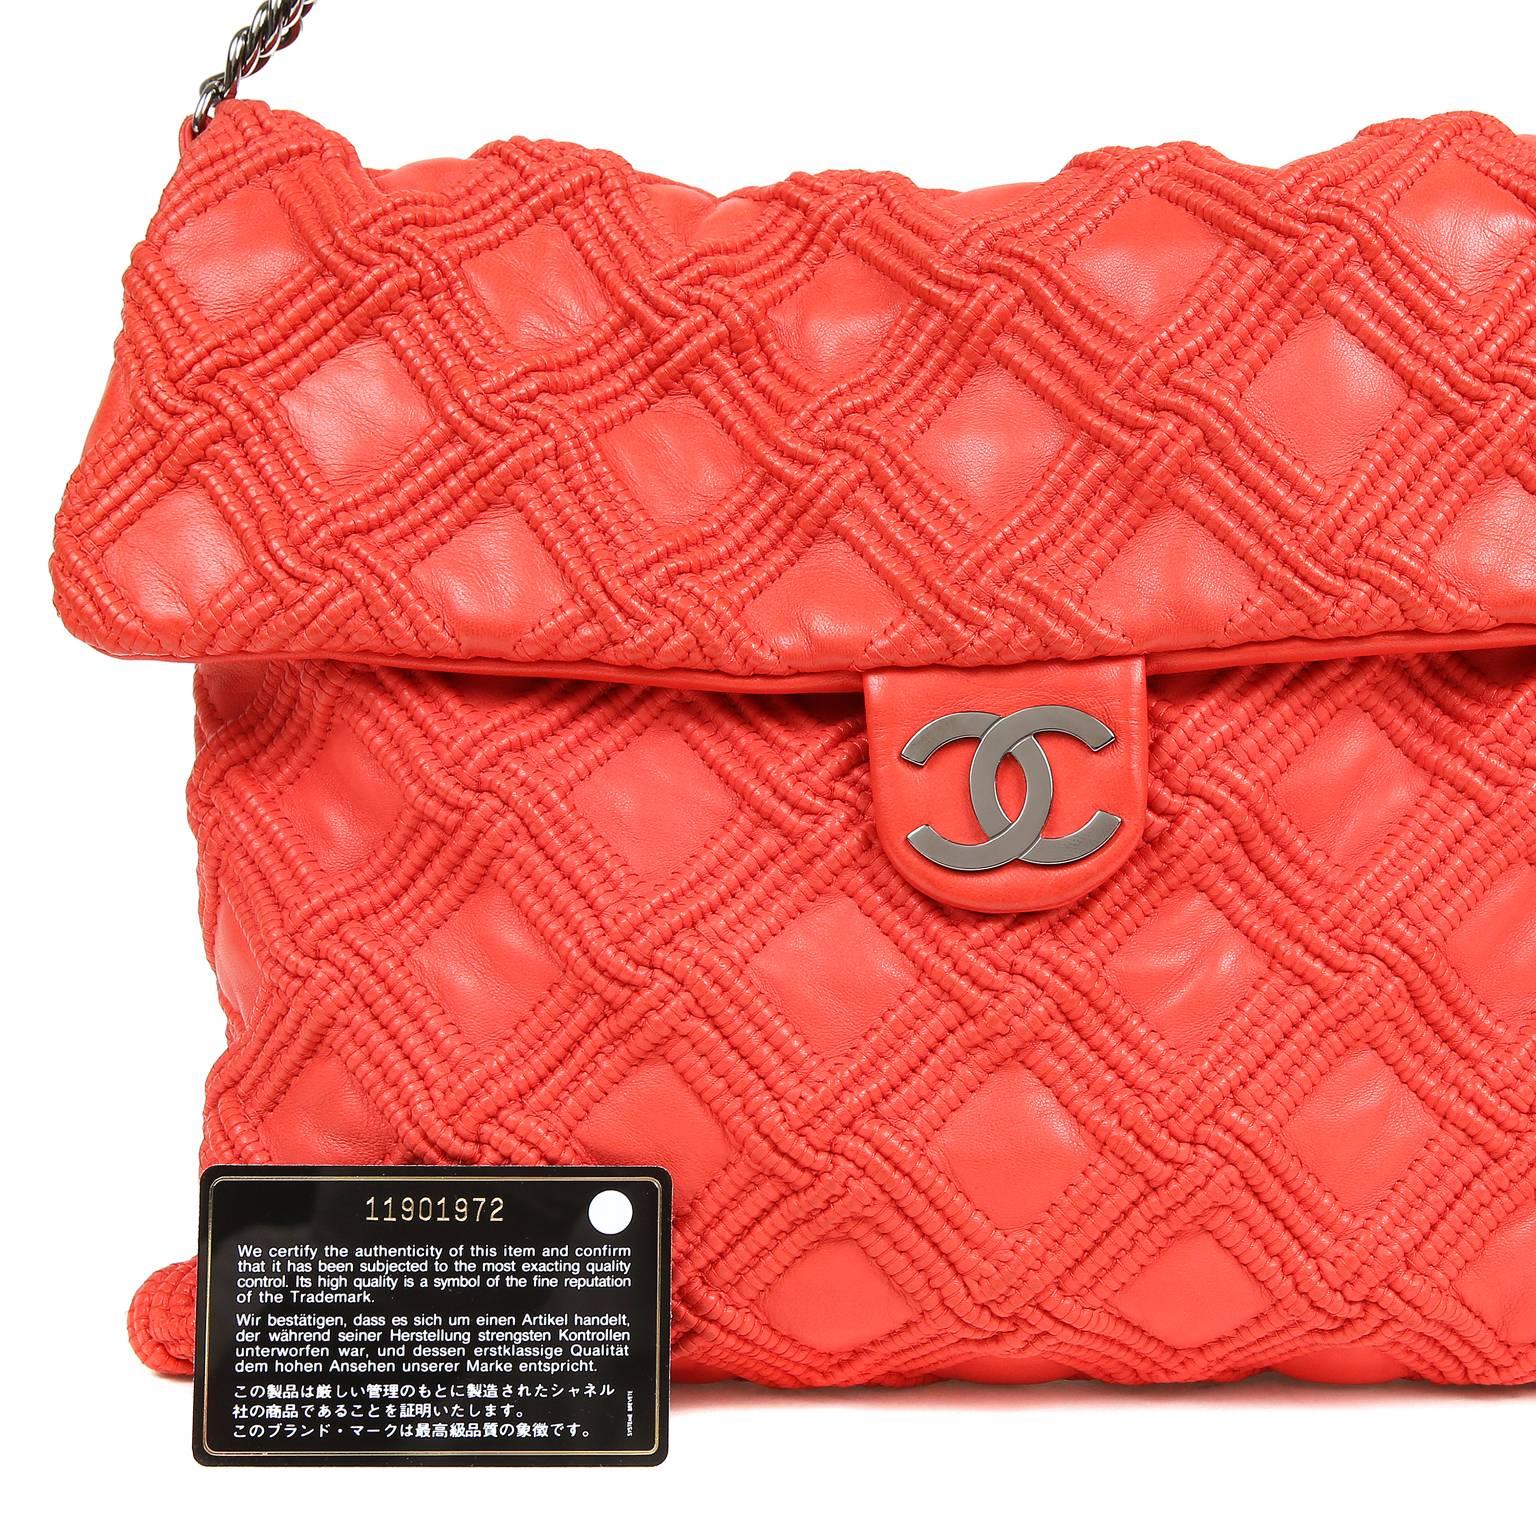 Chanel Red Leather Walk of Fame Flap Bag 4